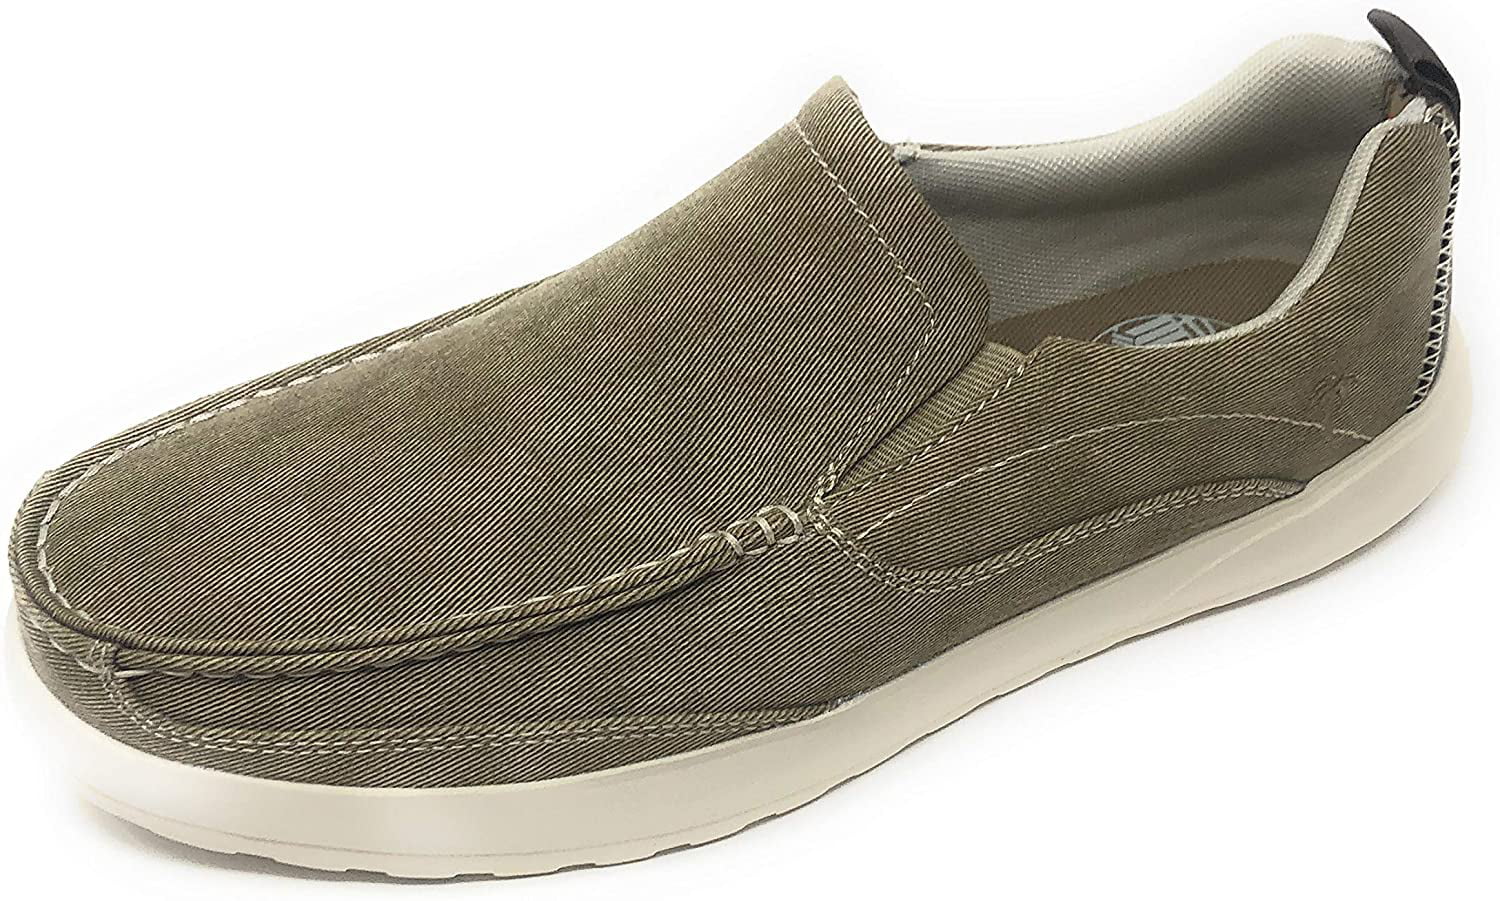 Canvas Dock Boat Shoes, 10.5 